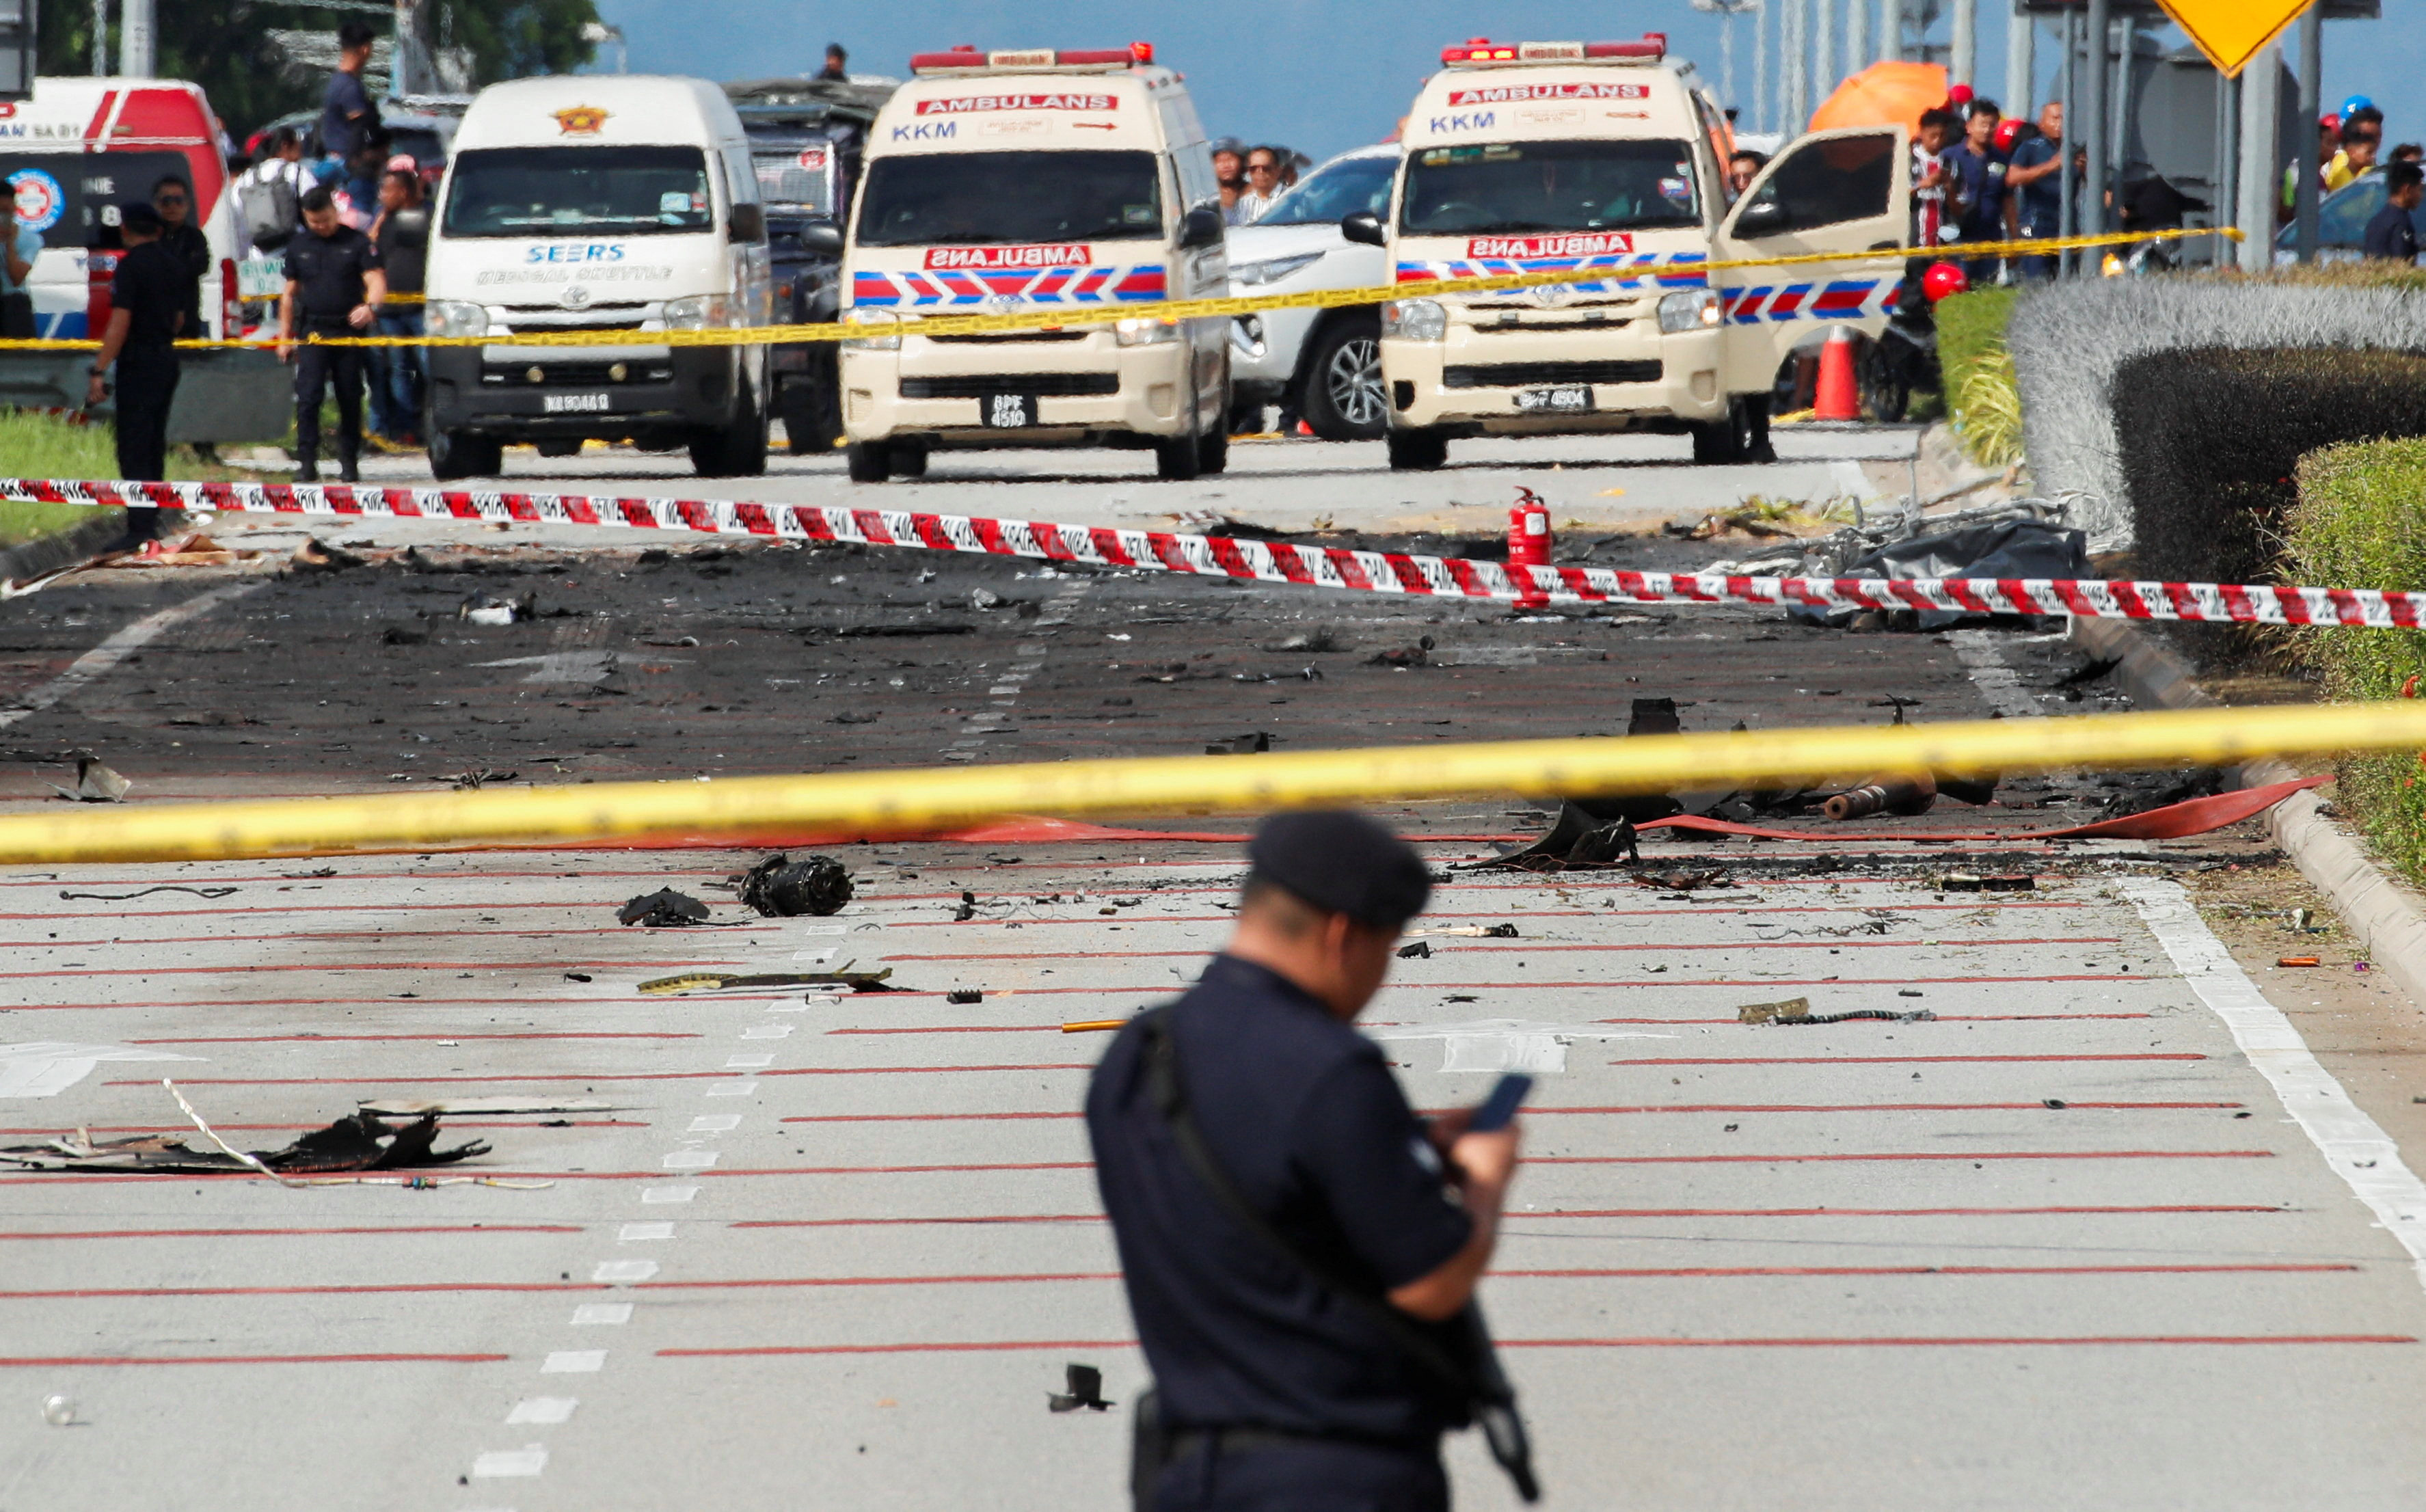 Police on the scene of the crash in Shah Alam, on August 17. Photo: Reuters